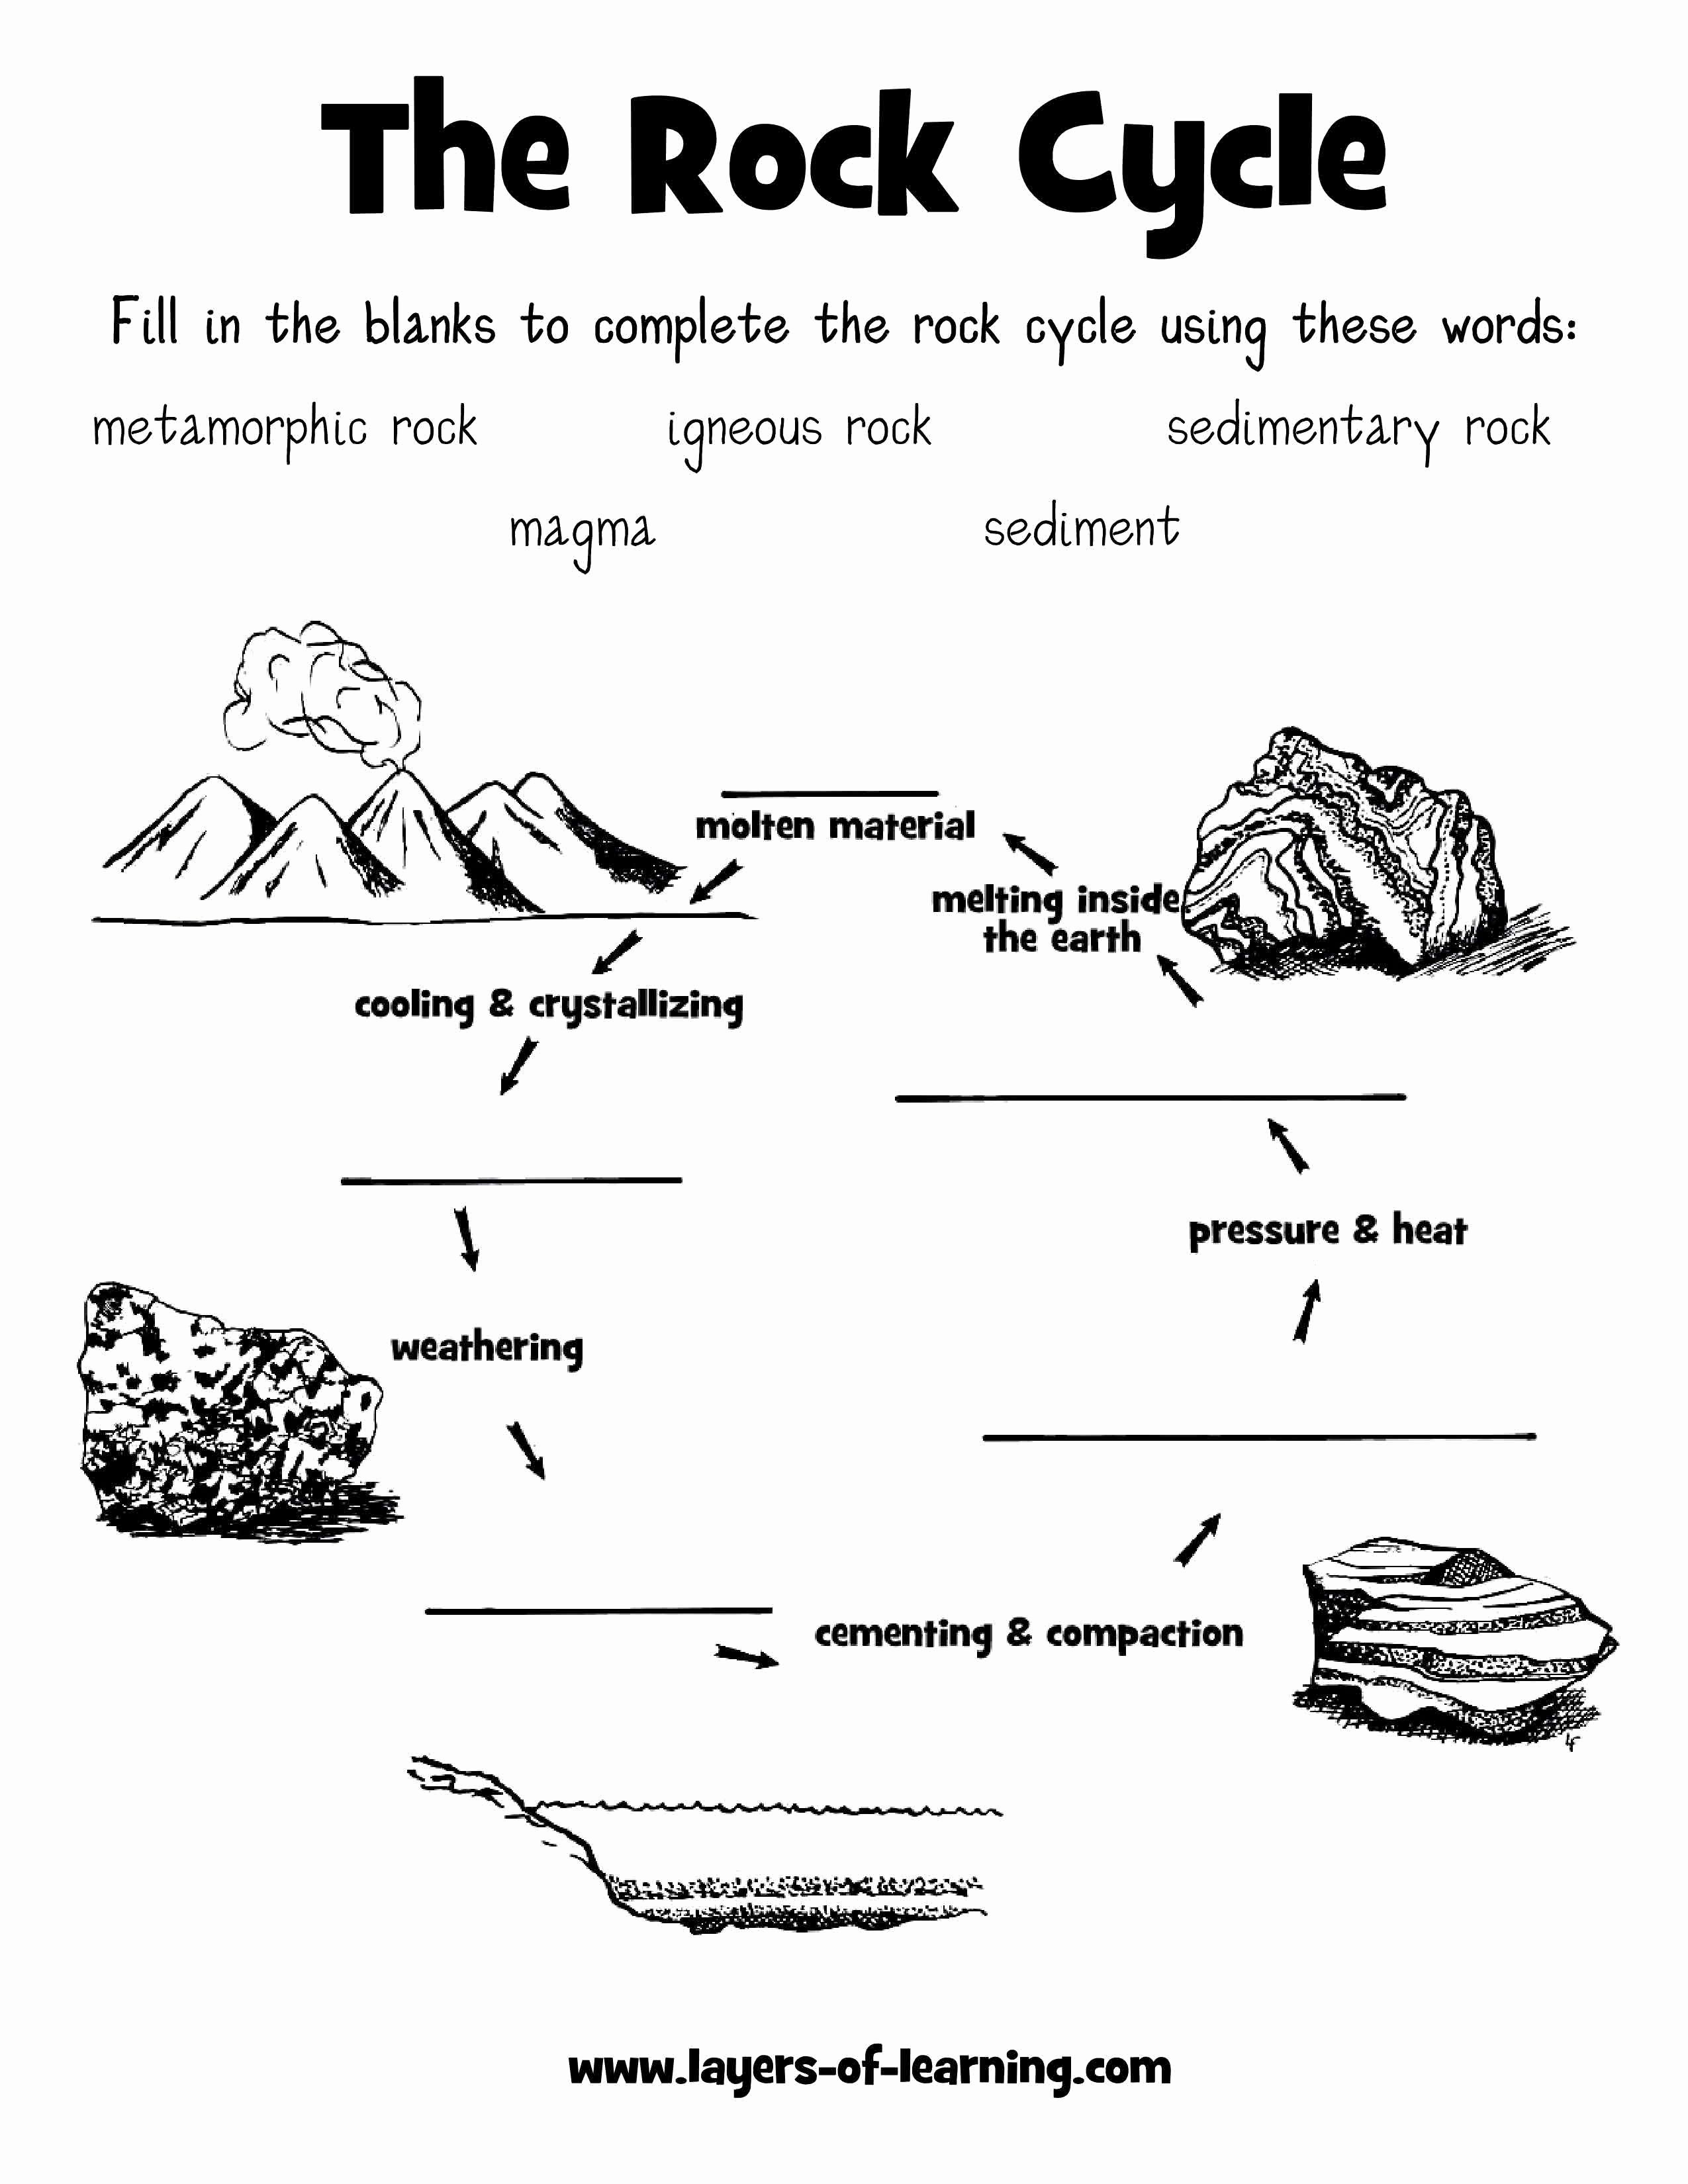 Rock Cycle Worksheet Answers Best Of Rock Cycle Worksheet Layers Of Learning